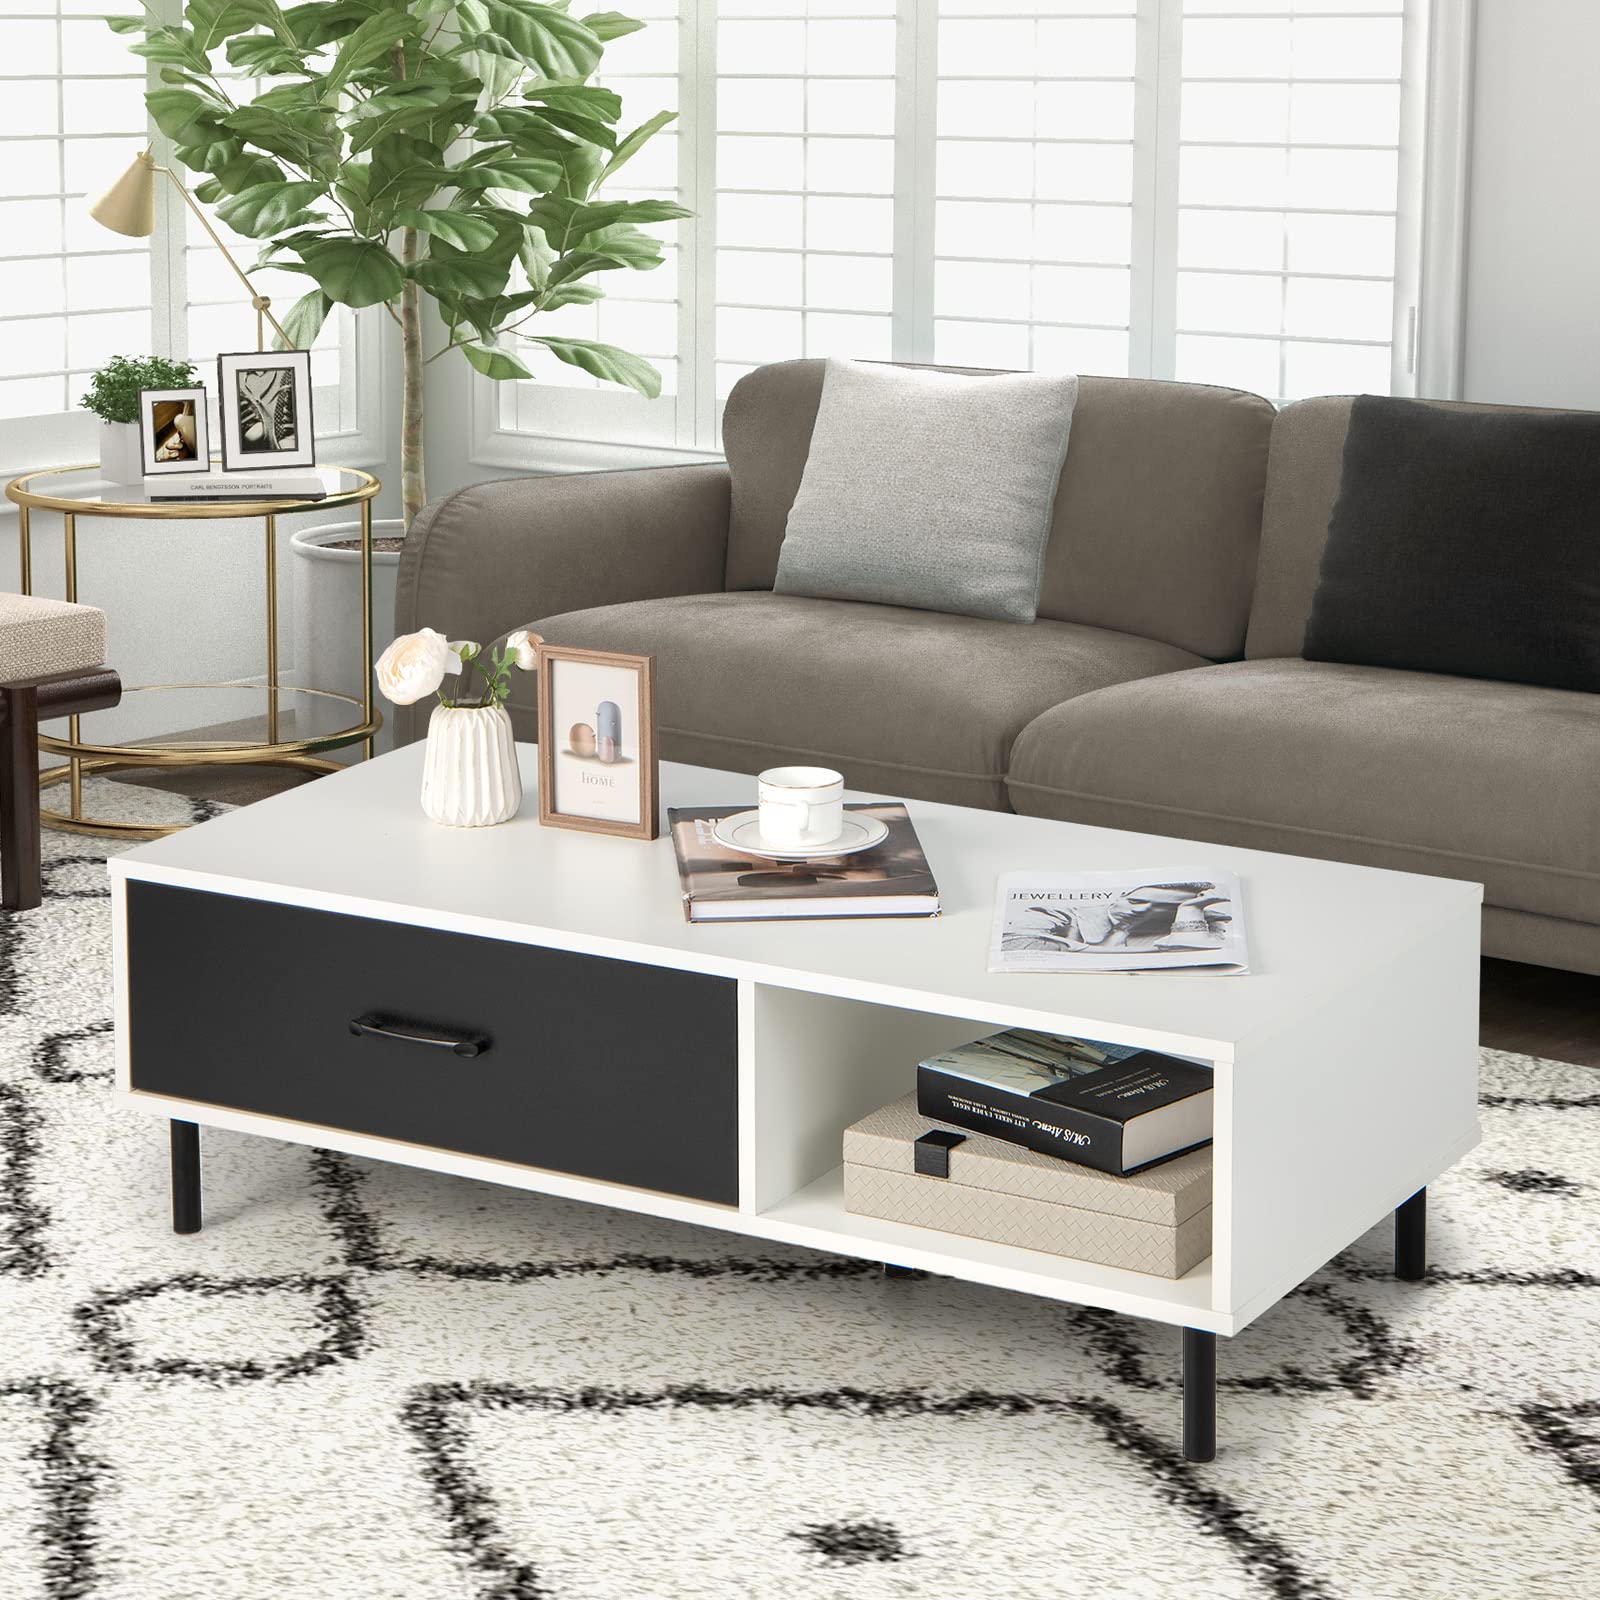 Giantex Coffee Table with Drawer & Storage Shelf, Wood Cocktail Table w/Open Cubby